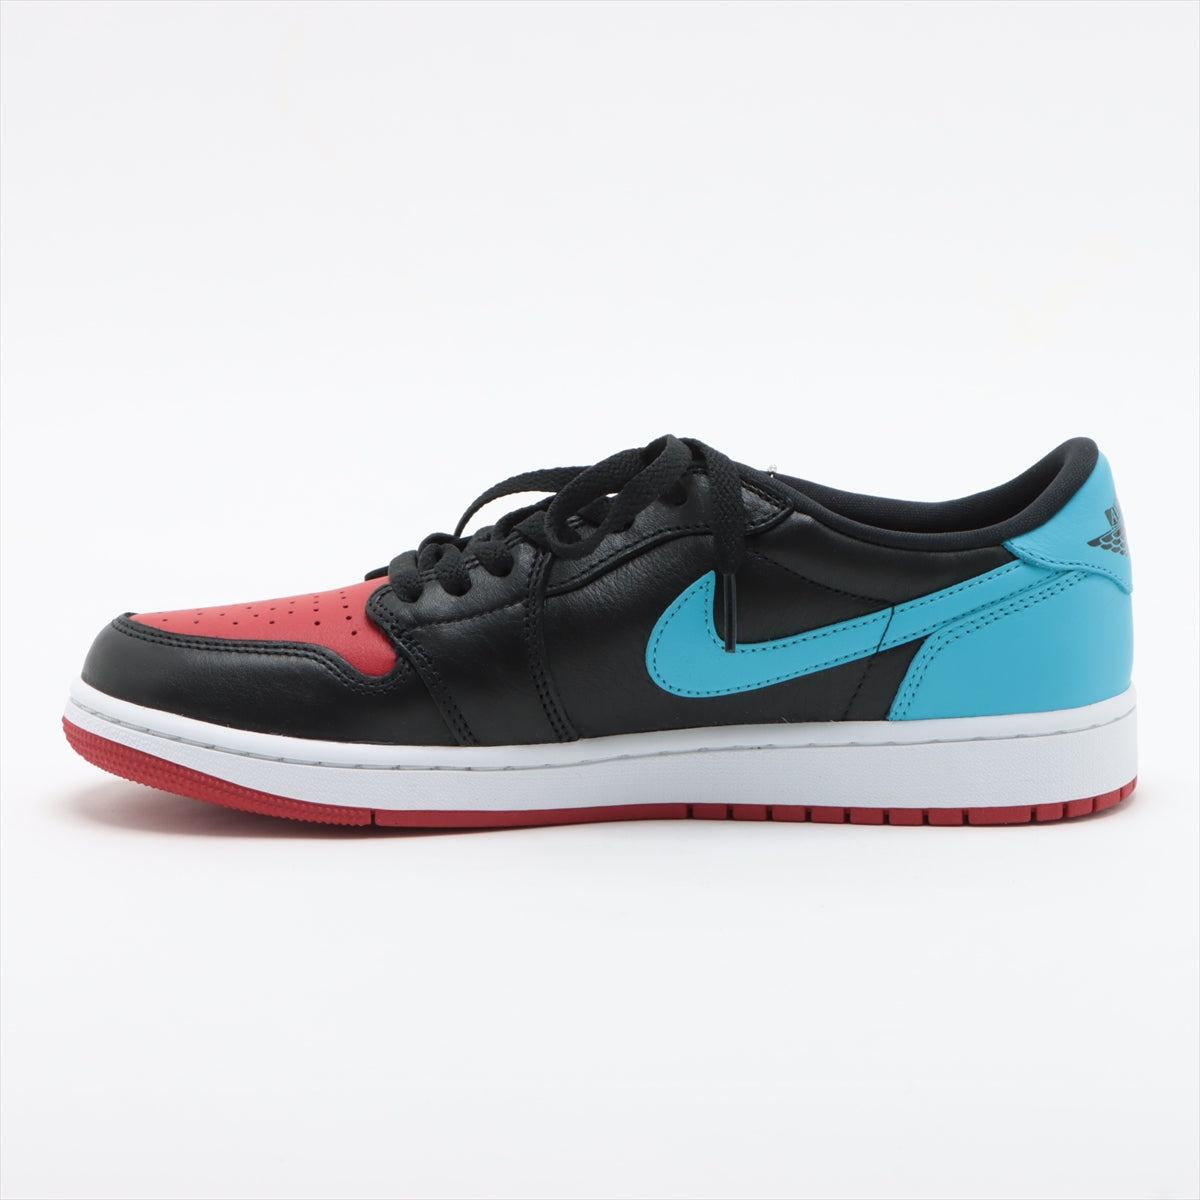 Nike Leather Sneakers 28㎝ Ladies' Multicolor CZ0775-046 AIR JORDAN 1 RETRO LOW OG box Is there a replacement string